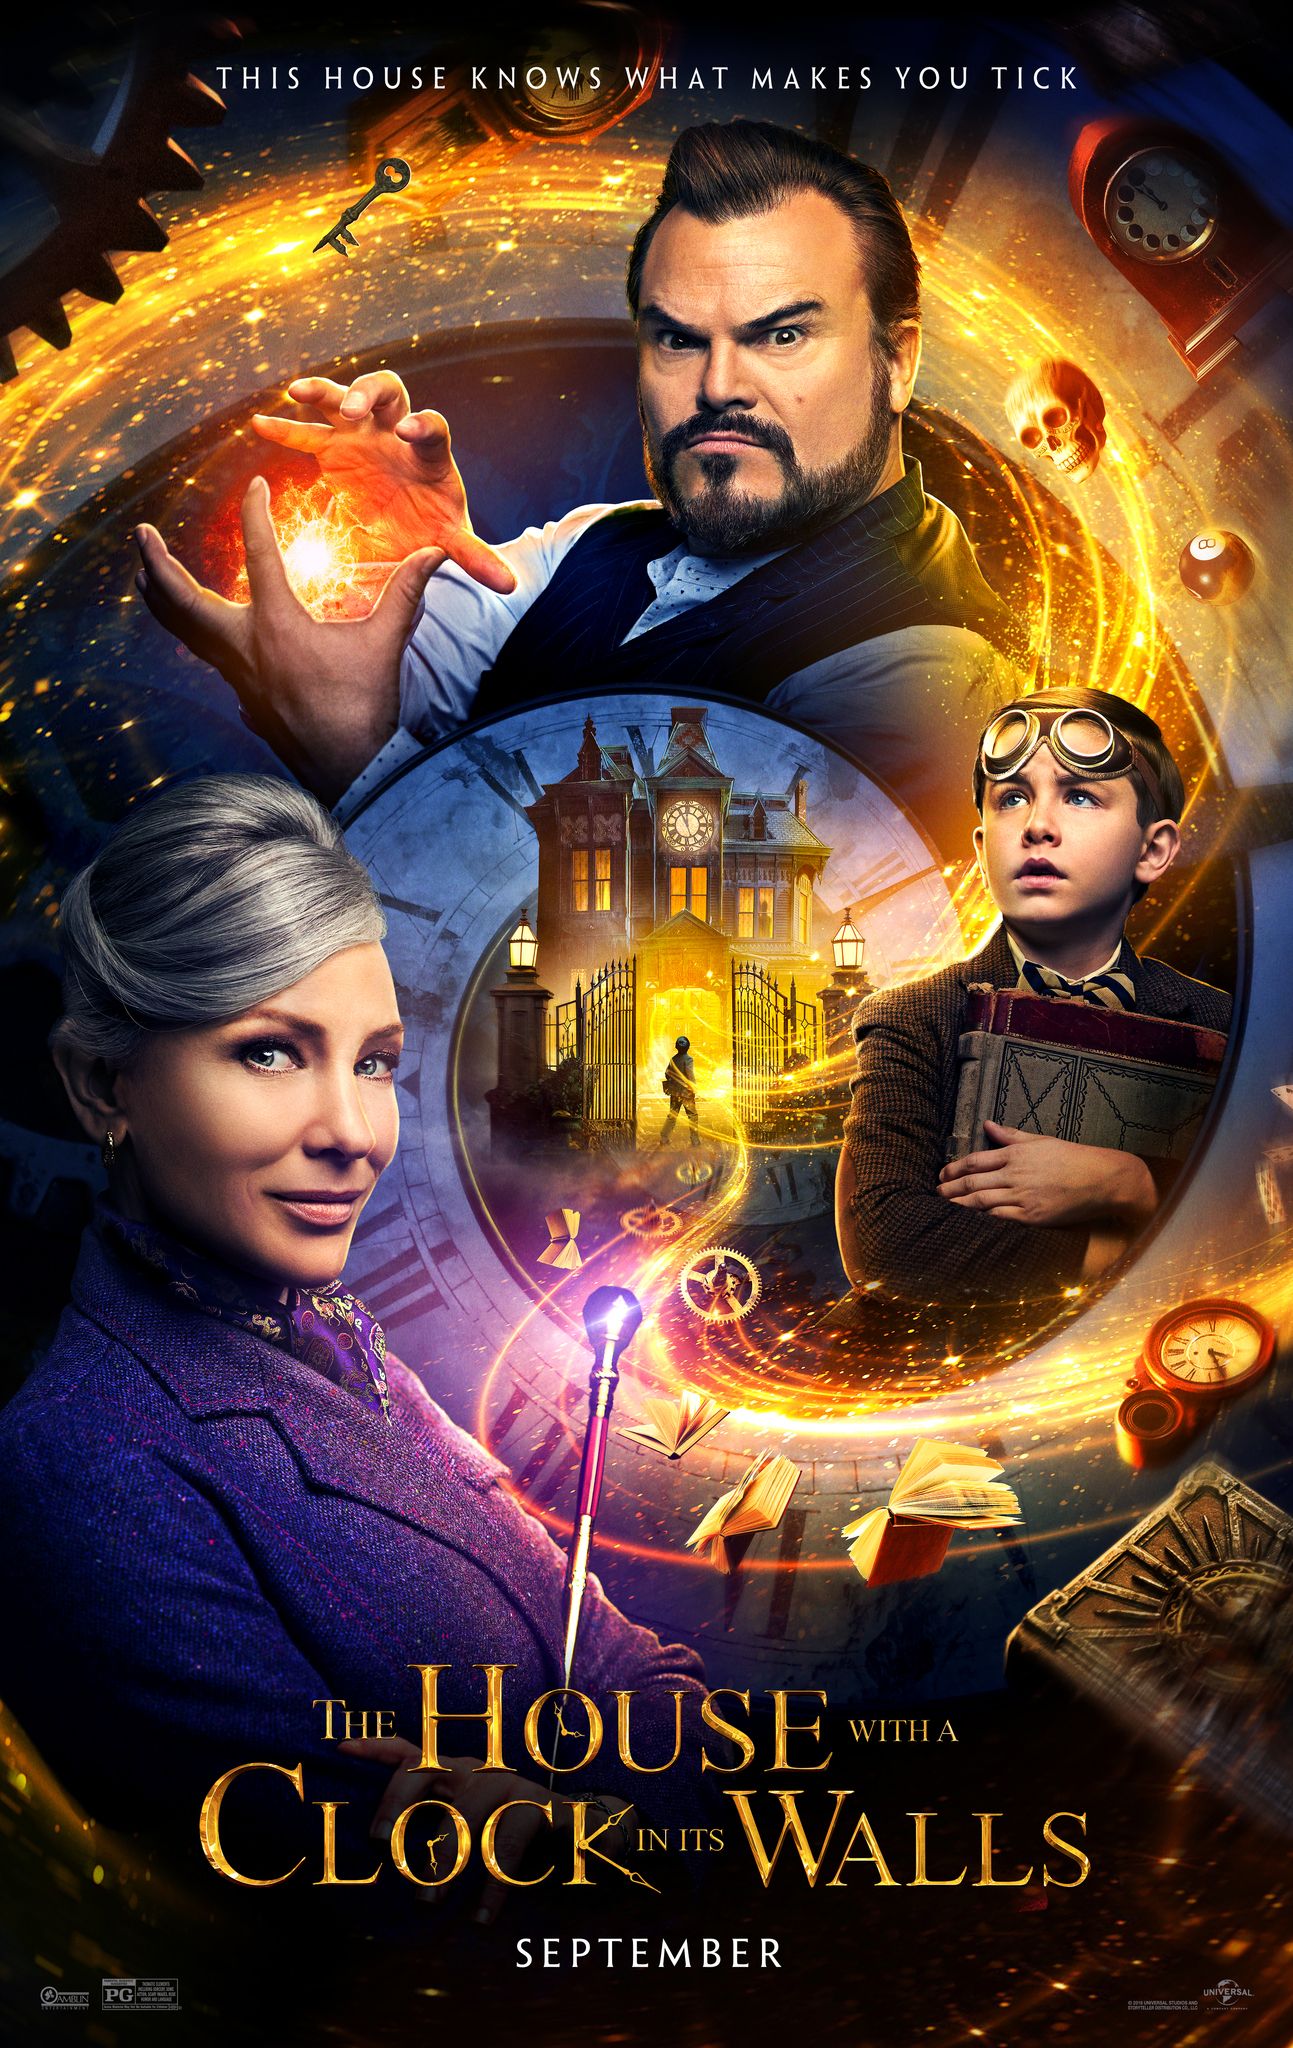 The House with a Clock in Its Walls (2018) English BluRay download full movie